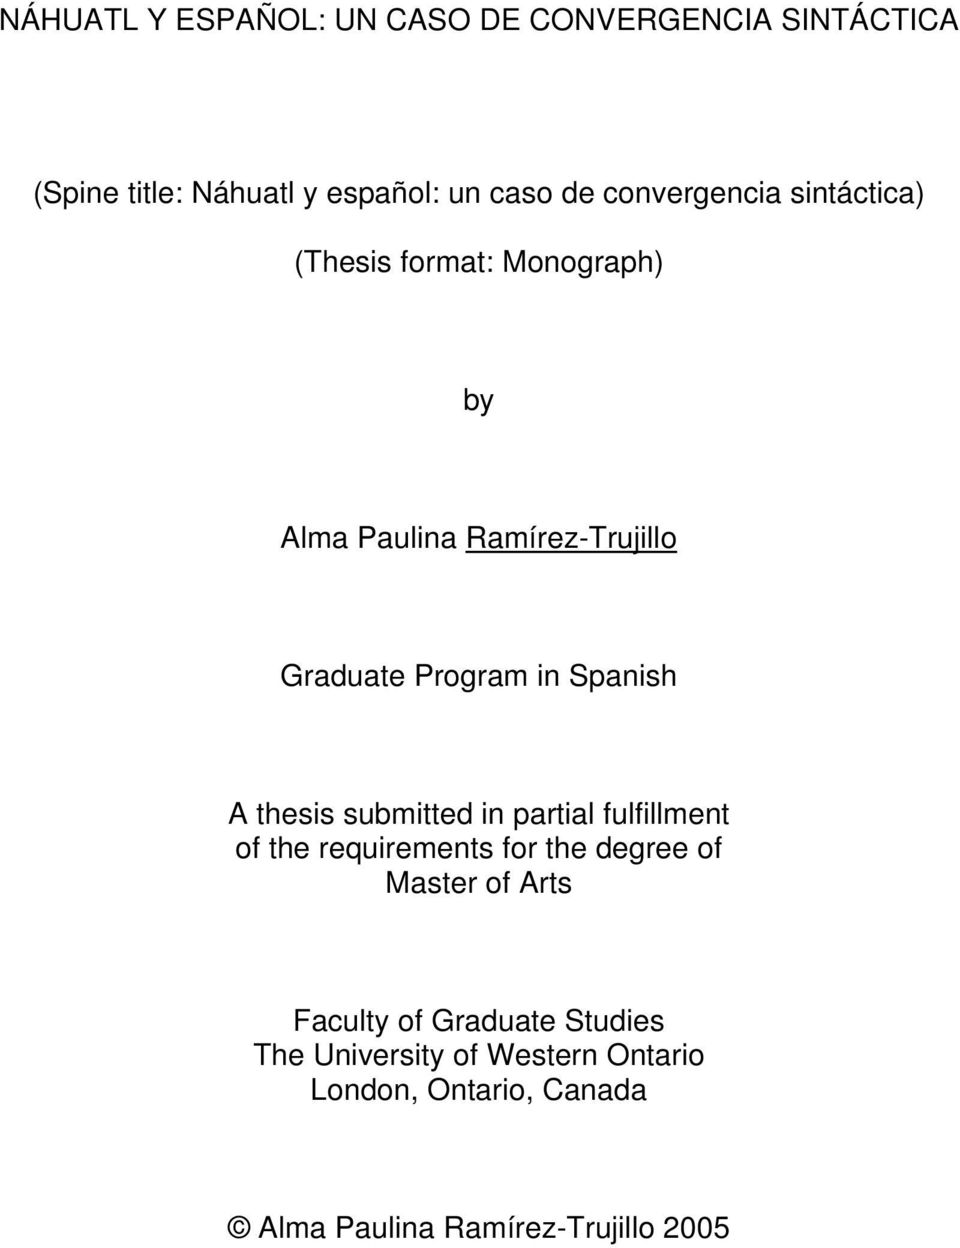 Spanish A thesis submitted in partial fulfillment of the requirements for the degree of Master of Arts